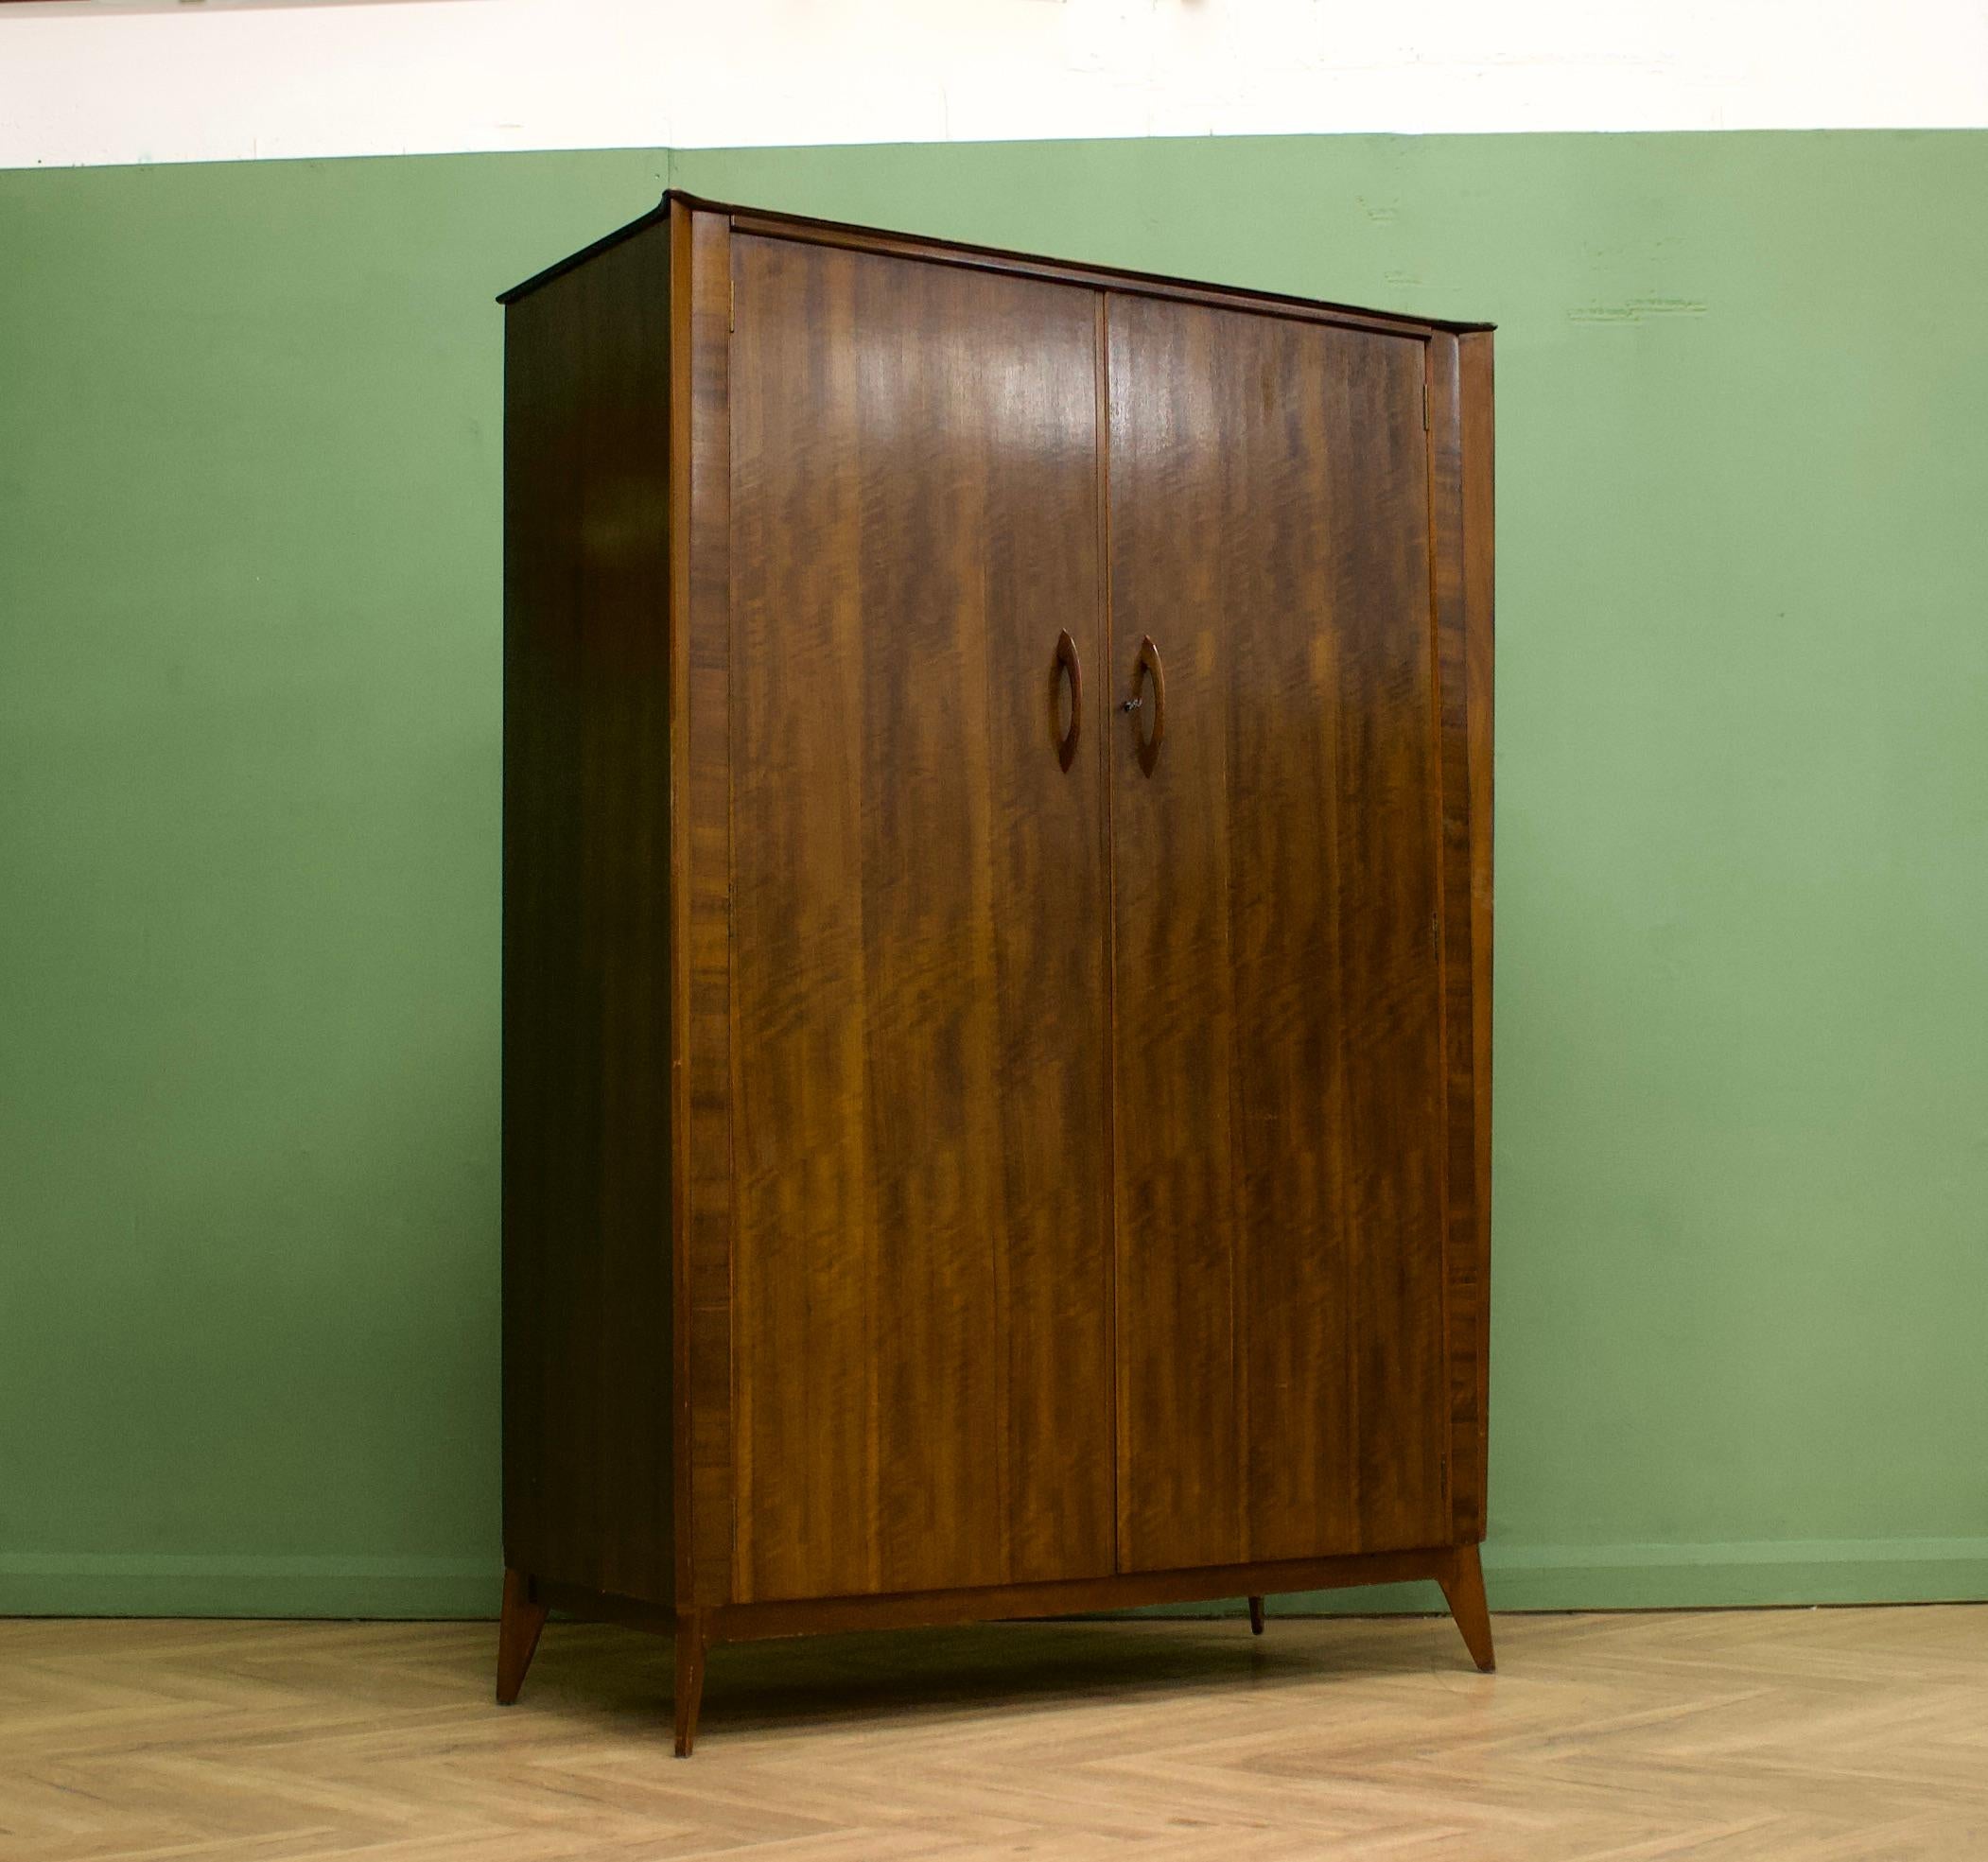 British Midcentury Vintage Walnut Wardrobe from Waring and Gillow, 1960s For Sale